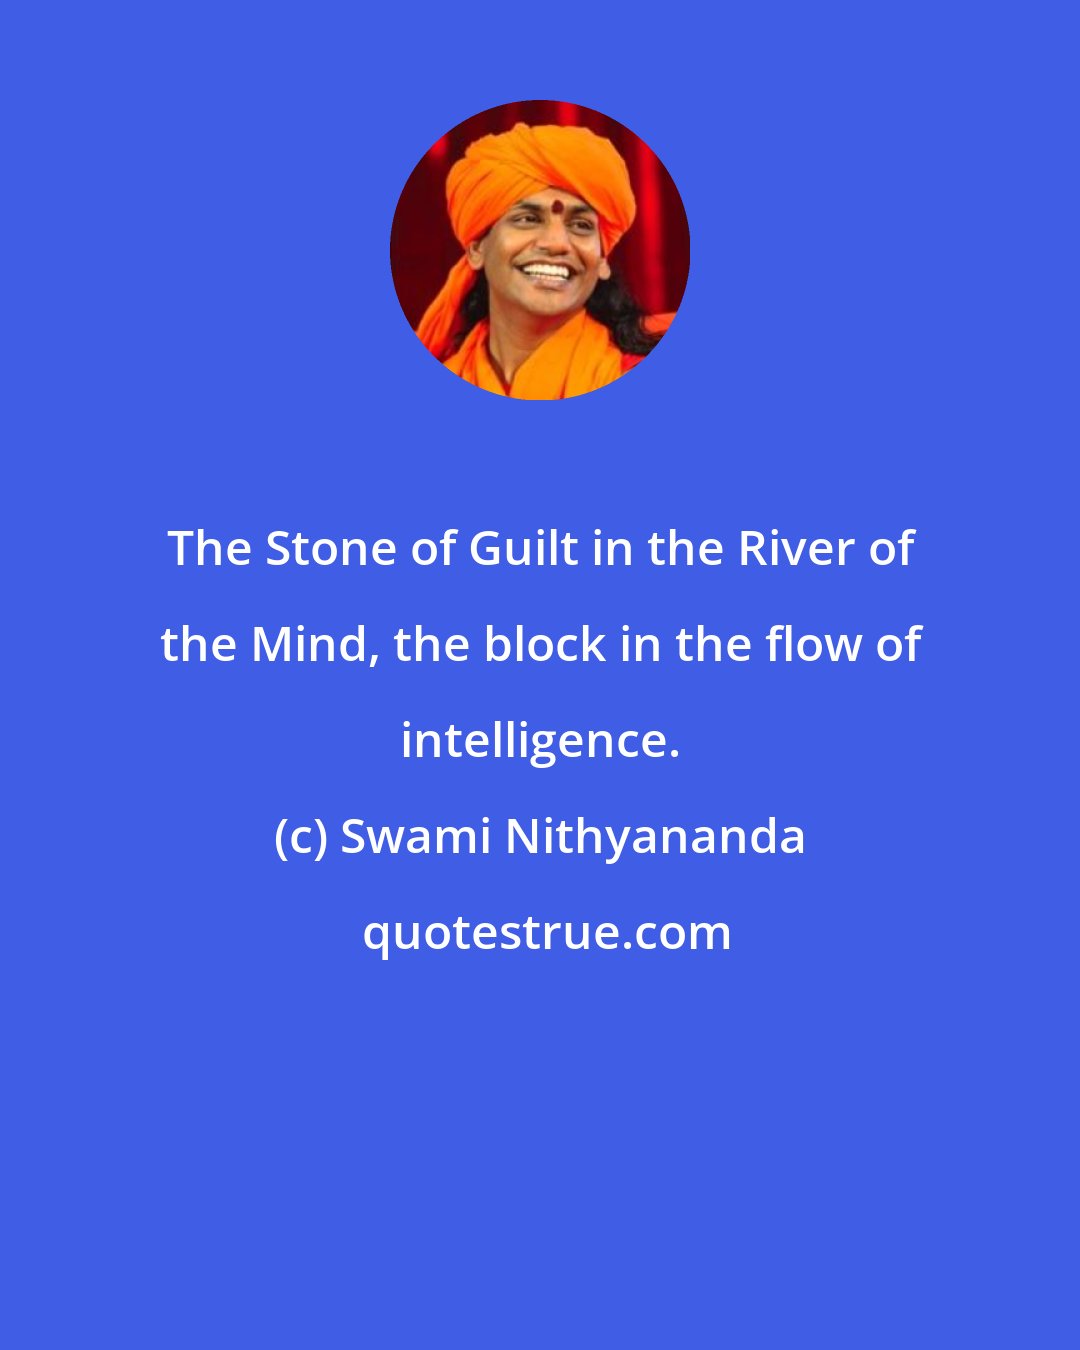 Swami Nithyananda: The Stone of Guilt in the River of the Mind, the block in the flow of intelligence.